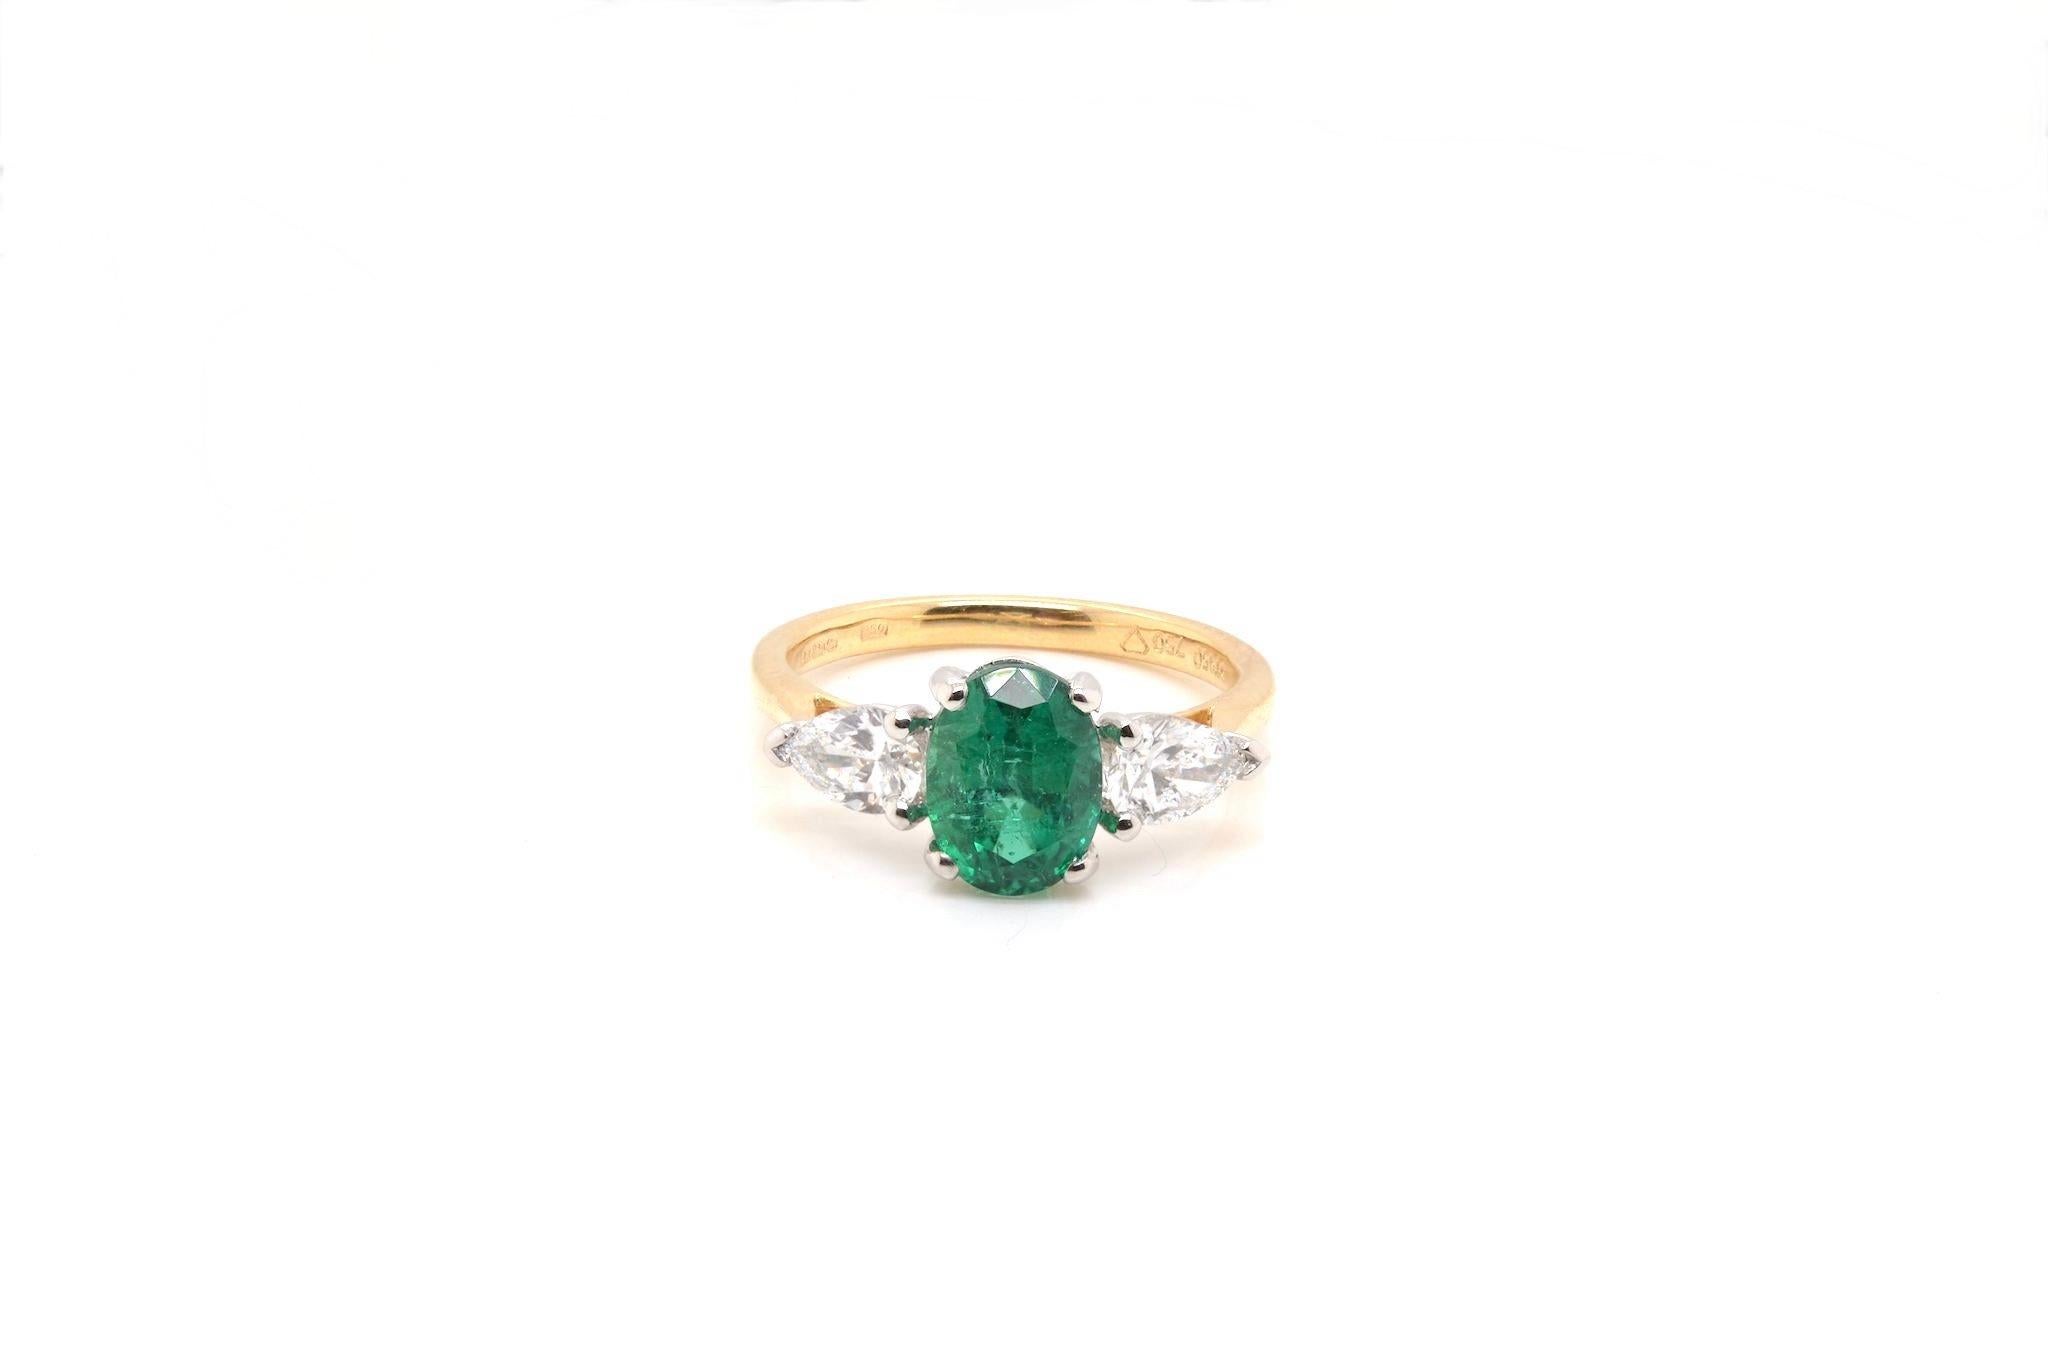 Stones: 1 oval emerald of 1.5 cts and 2 pear-shaped diamonds, total weight: 0.60ct
Material: 18k yellow gold and platinum
Weight: 4.1g
Period: Current
Size: 51 (free sizing).
Certificate
Ref. : 24956/24902